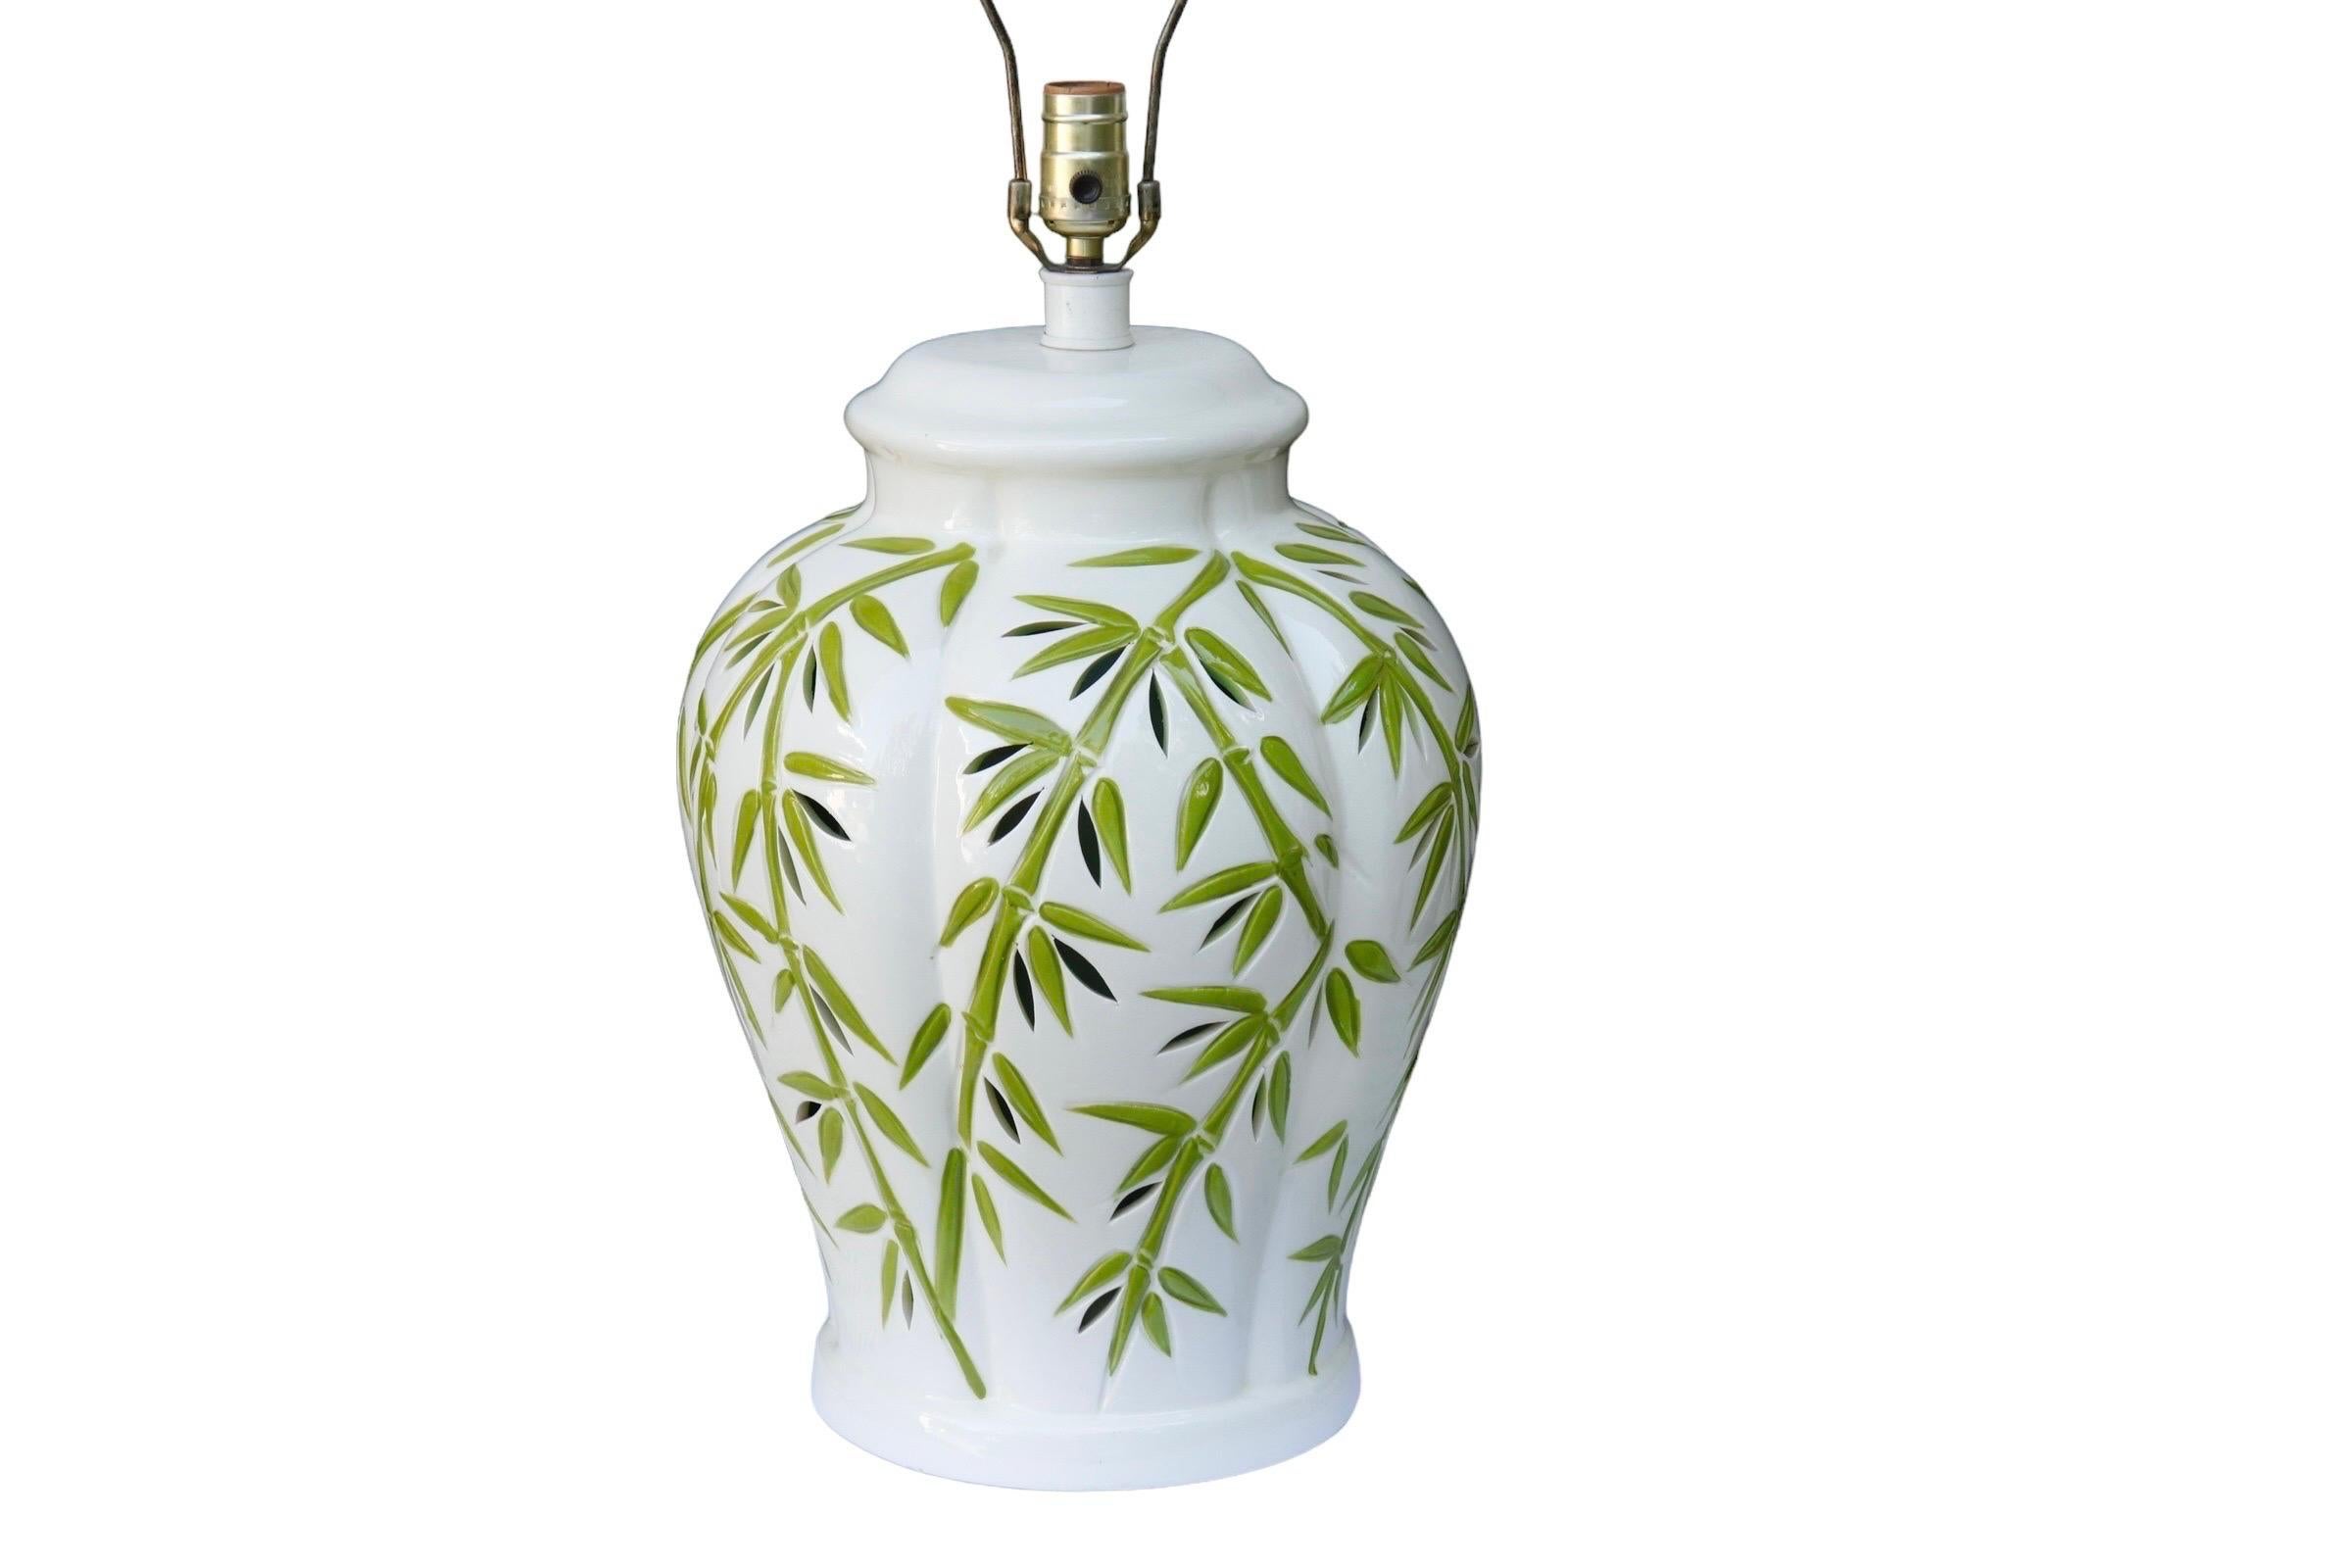 A large white and green ceramic table lamp made by Sunset Cosco Lamps. The vase is decorated with engraved and painted stylized bamboo, pierced with foliate shapes. At the base is a radial switch that turns on an interior light, and there is a